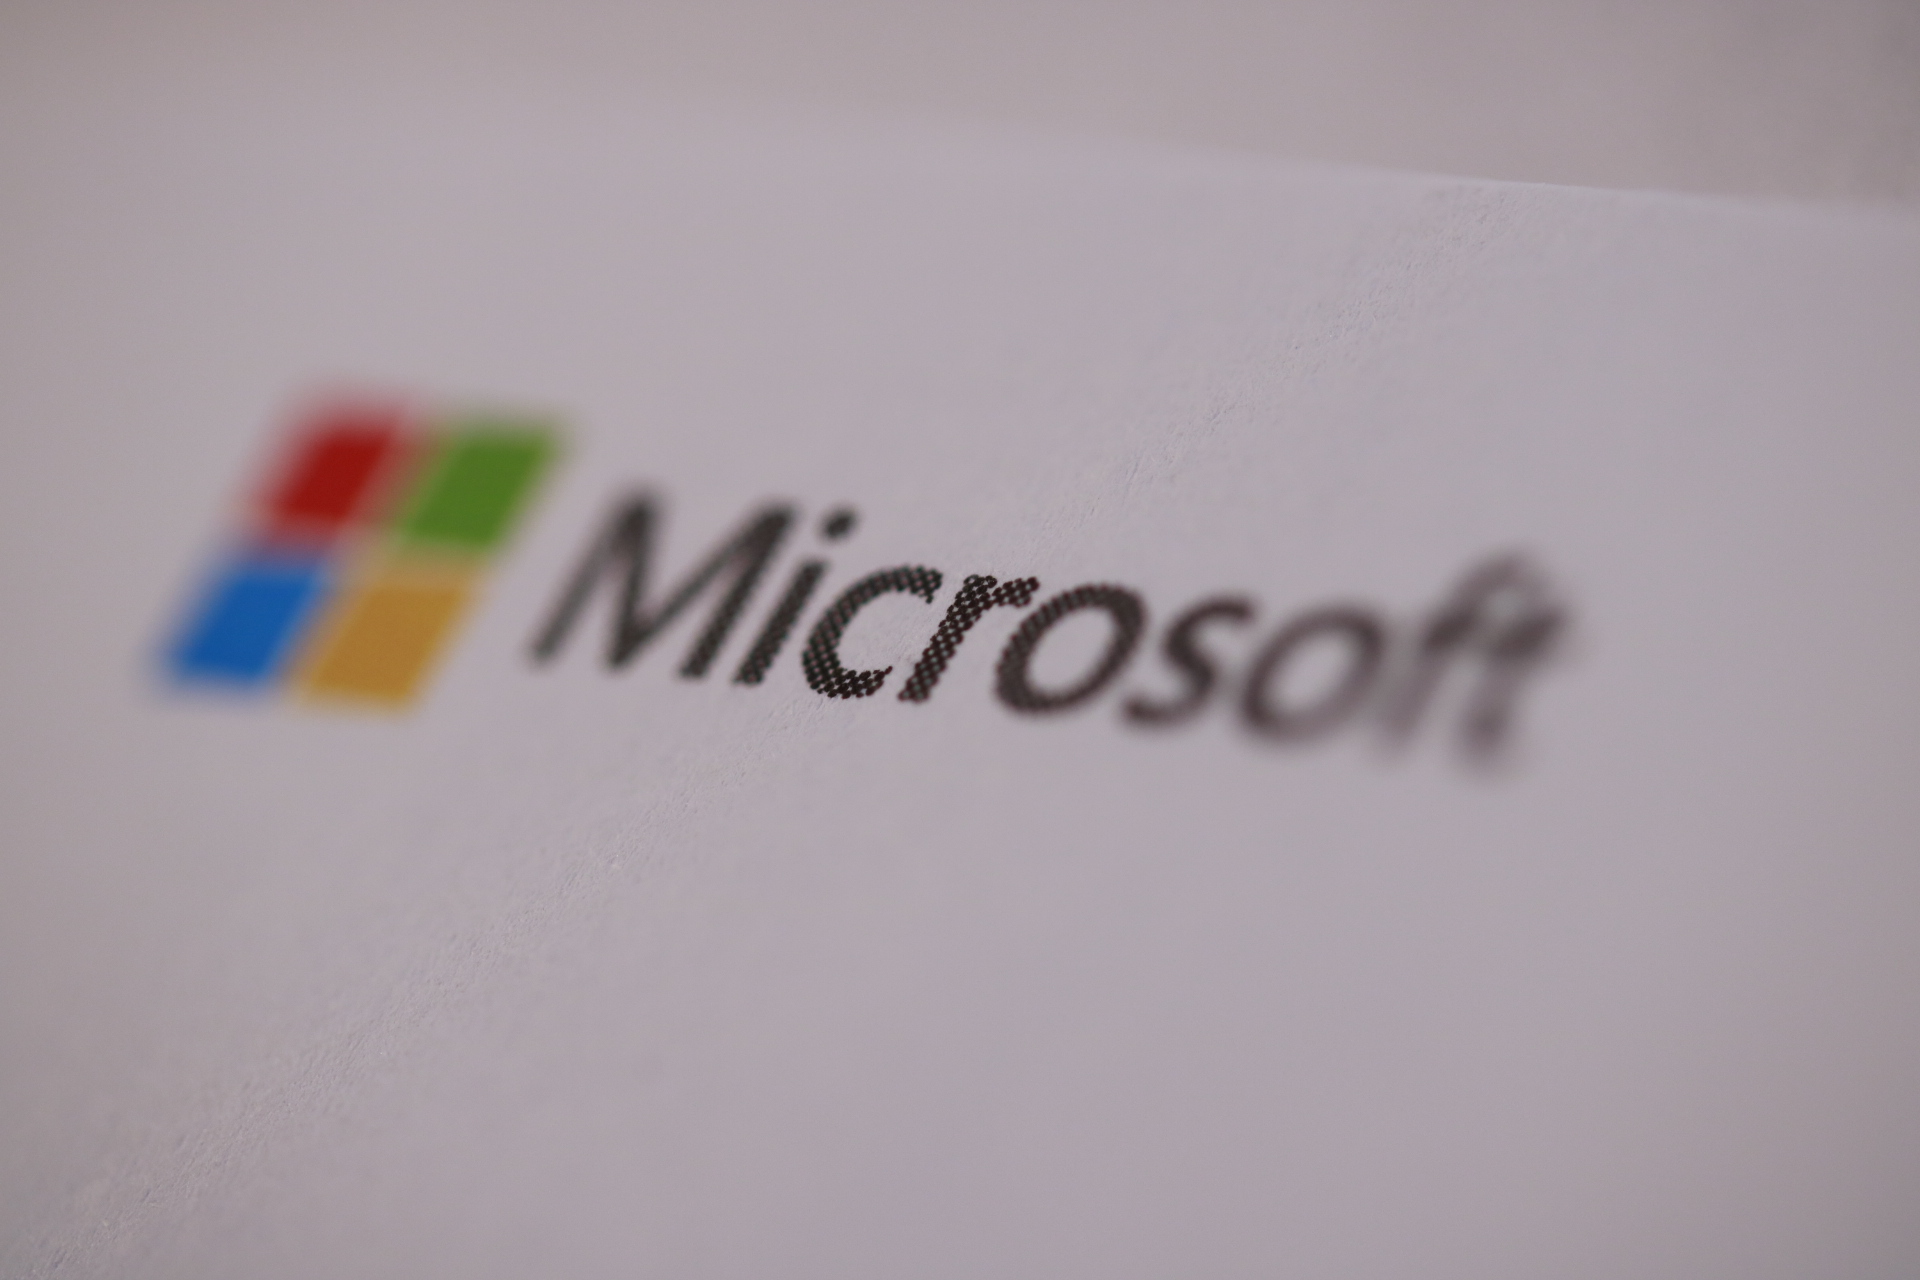 Microsoft hikes dividend by 7.7%